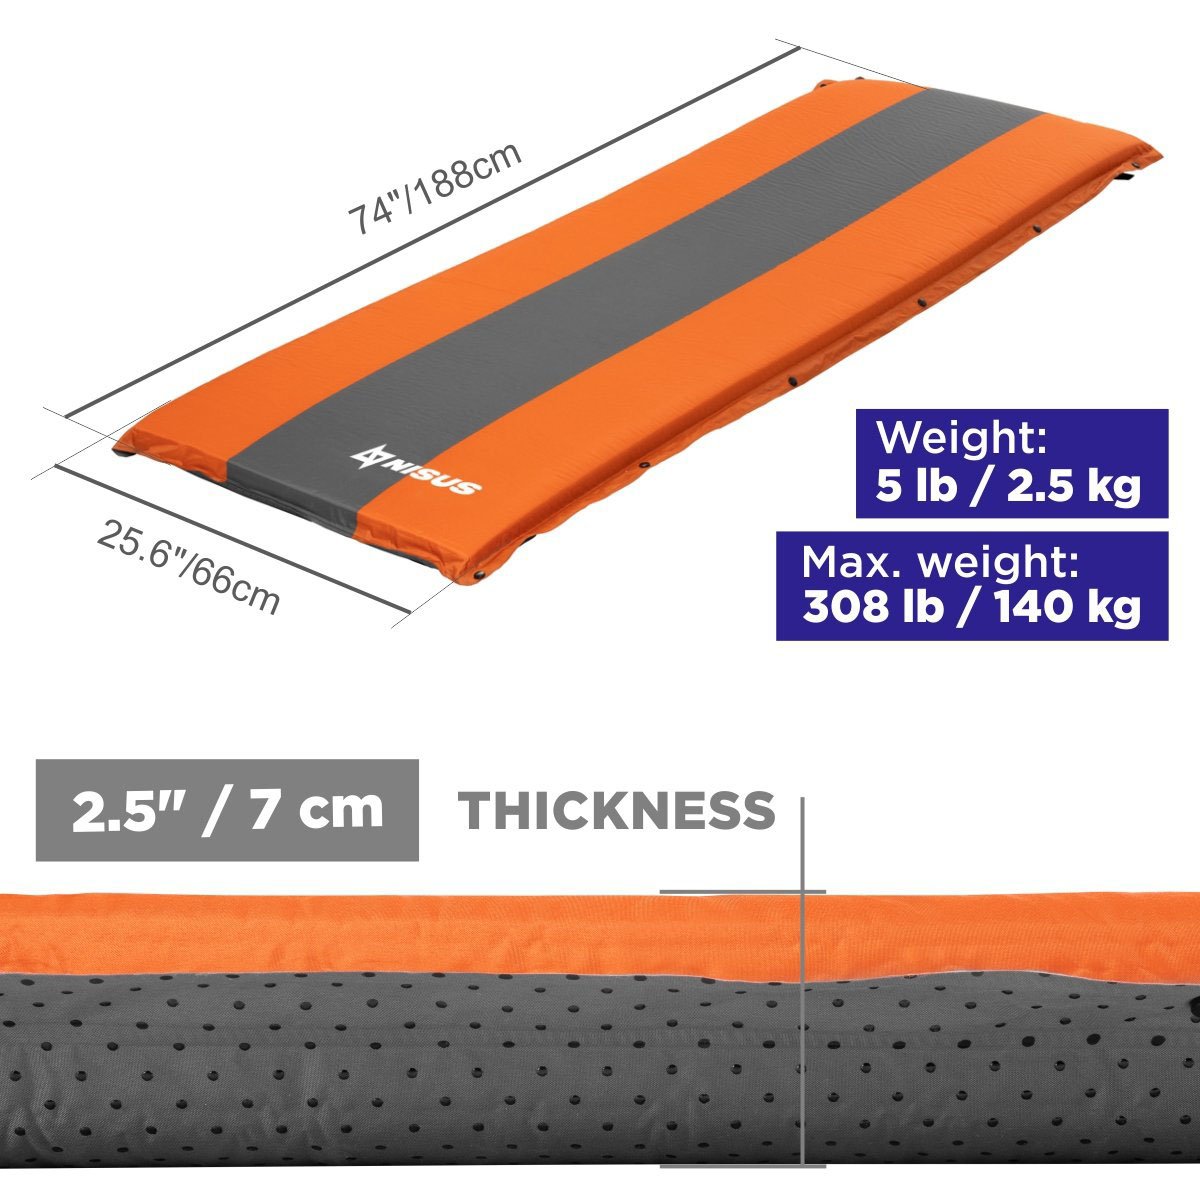 74" long, 25.6" wide, 2.5" thick Orange Self Inflating Sleeping Pad weighs only 5 lb